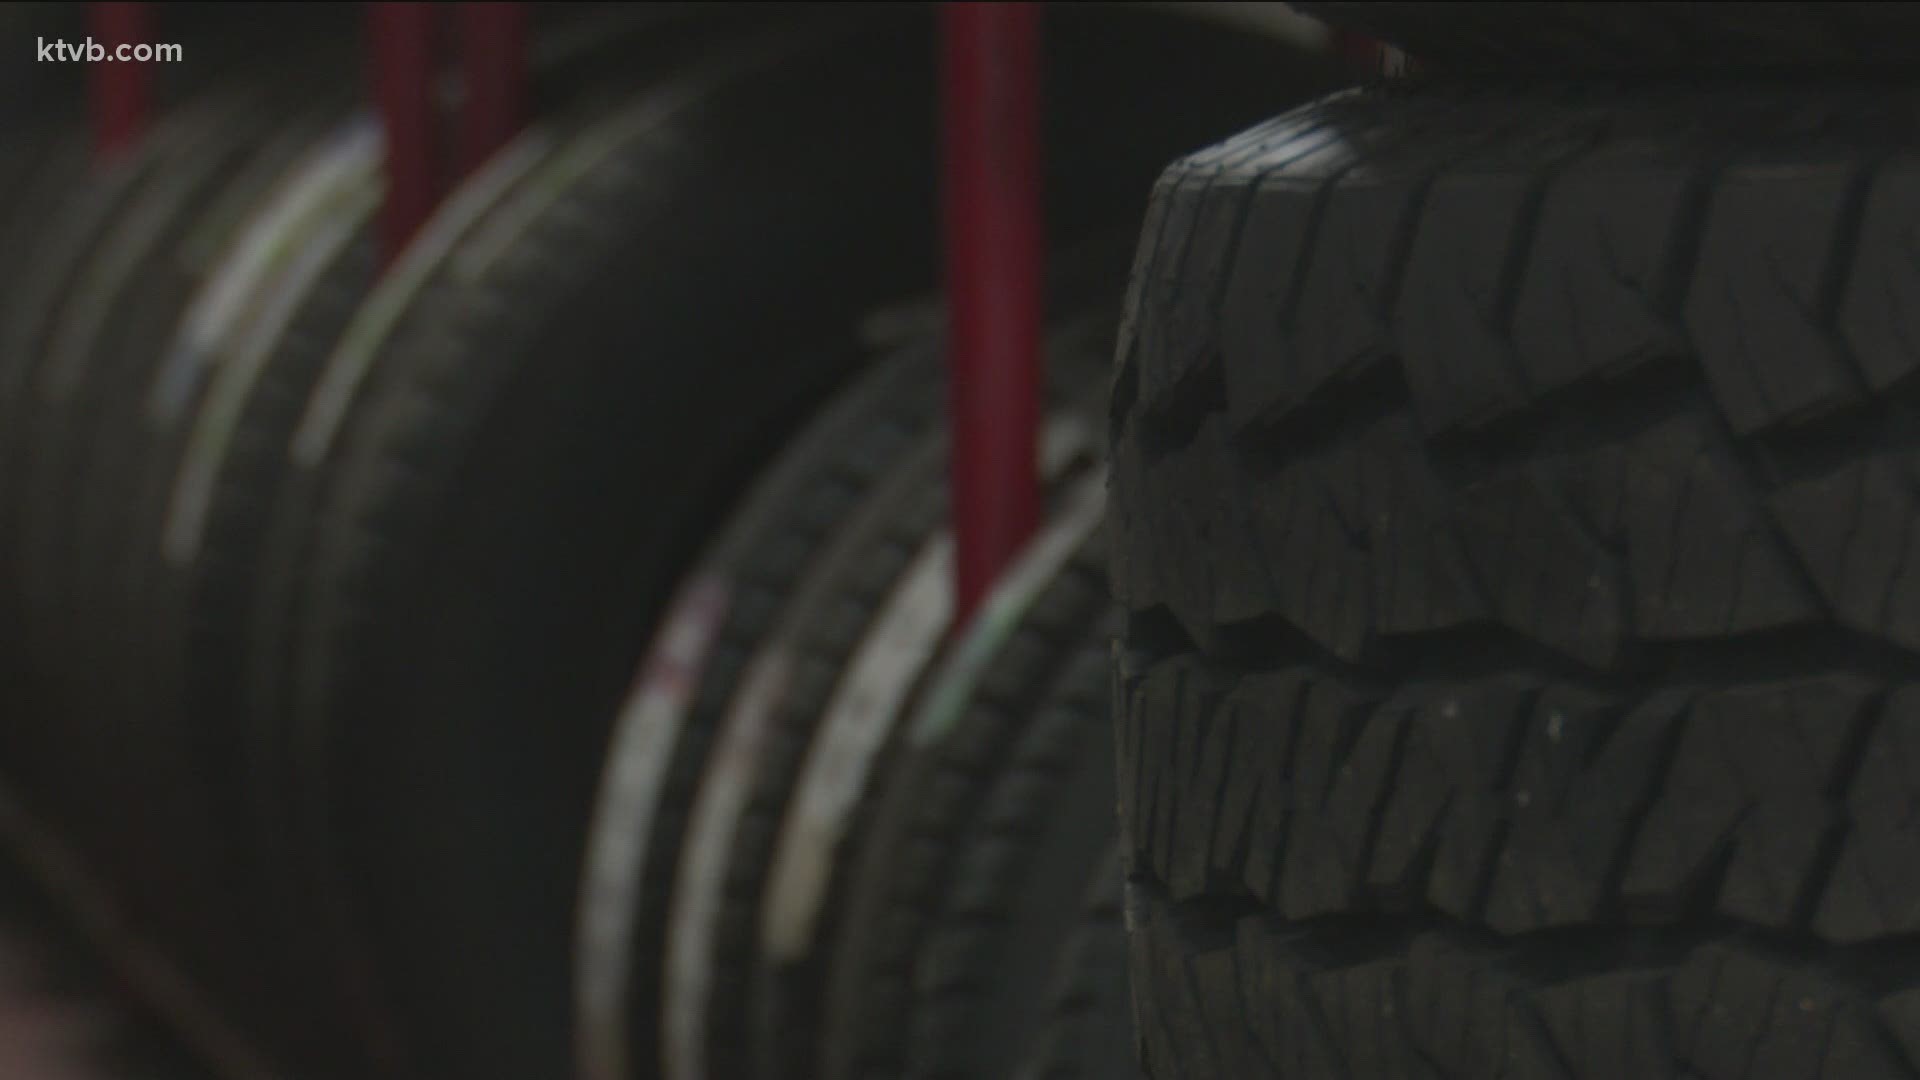 It's time to start thinking about putting snow tires on your car.